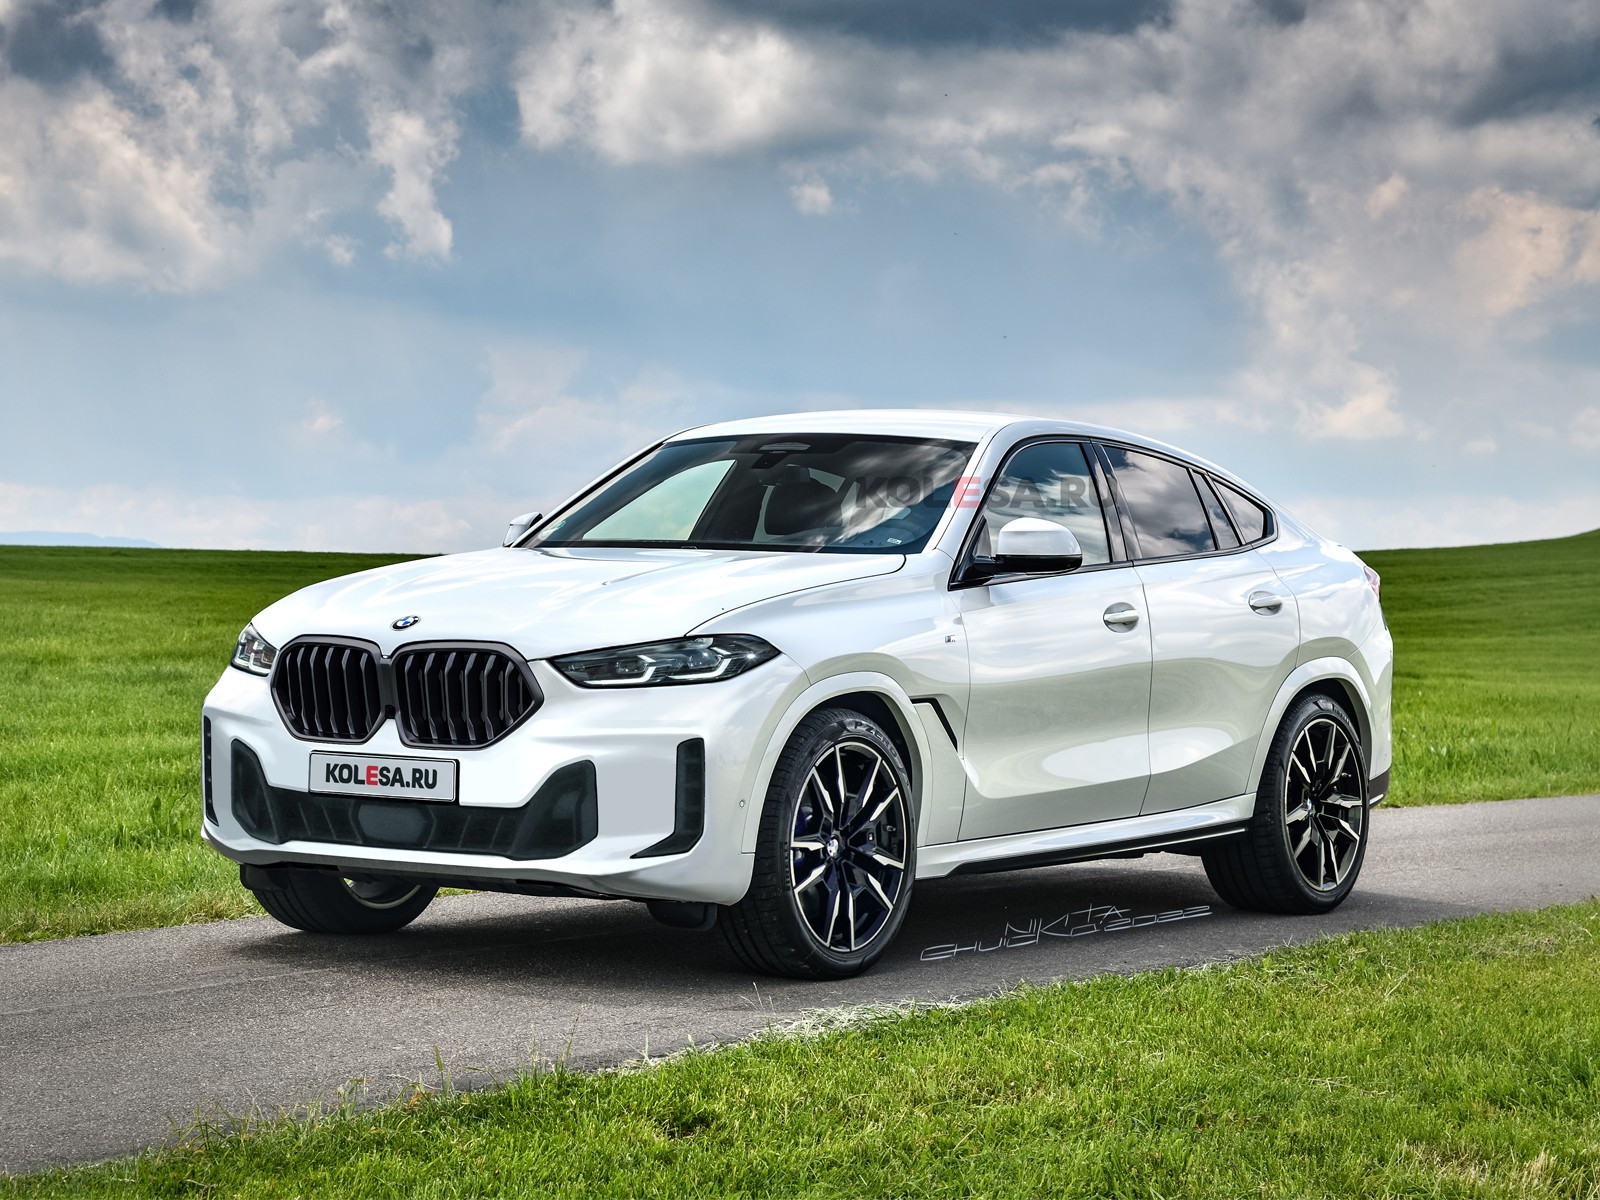 https://s1.cdn.autoevolution.com/images/news/2023-bmw-x6-looks-better-with-the-camo-on-than-off-they-should-offer-it-as-an-option-181579_1.jpg